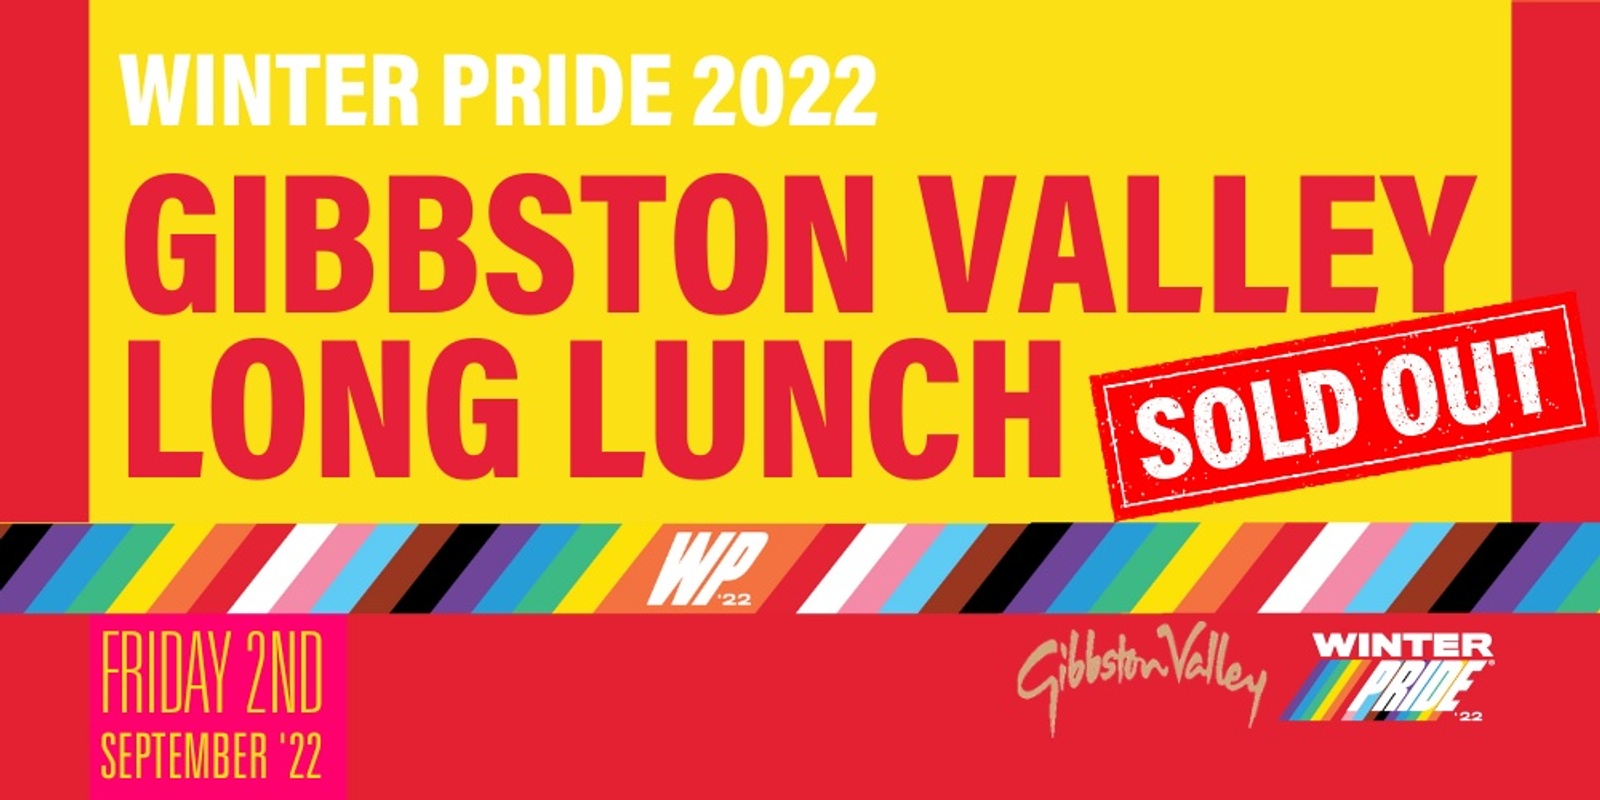 Banner image for Gibbston Valley Long Lunch WP '22